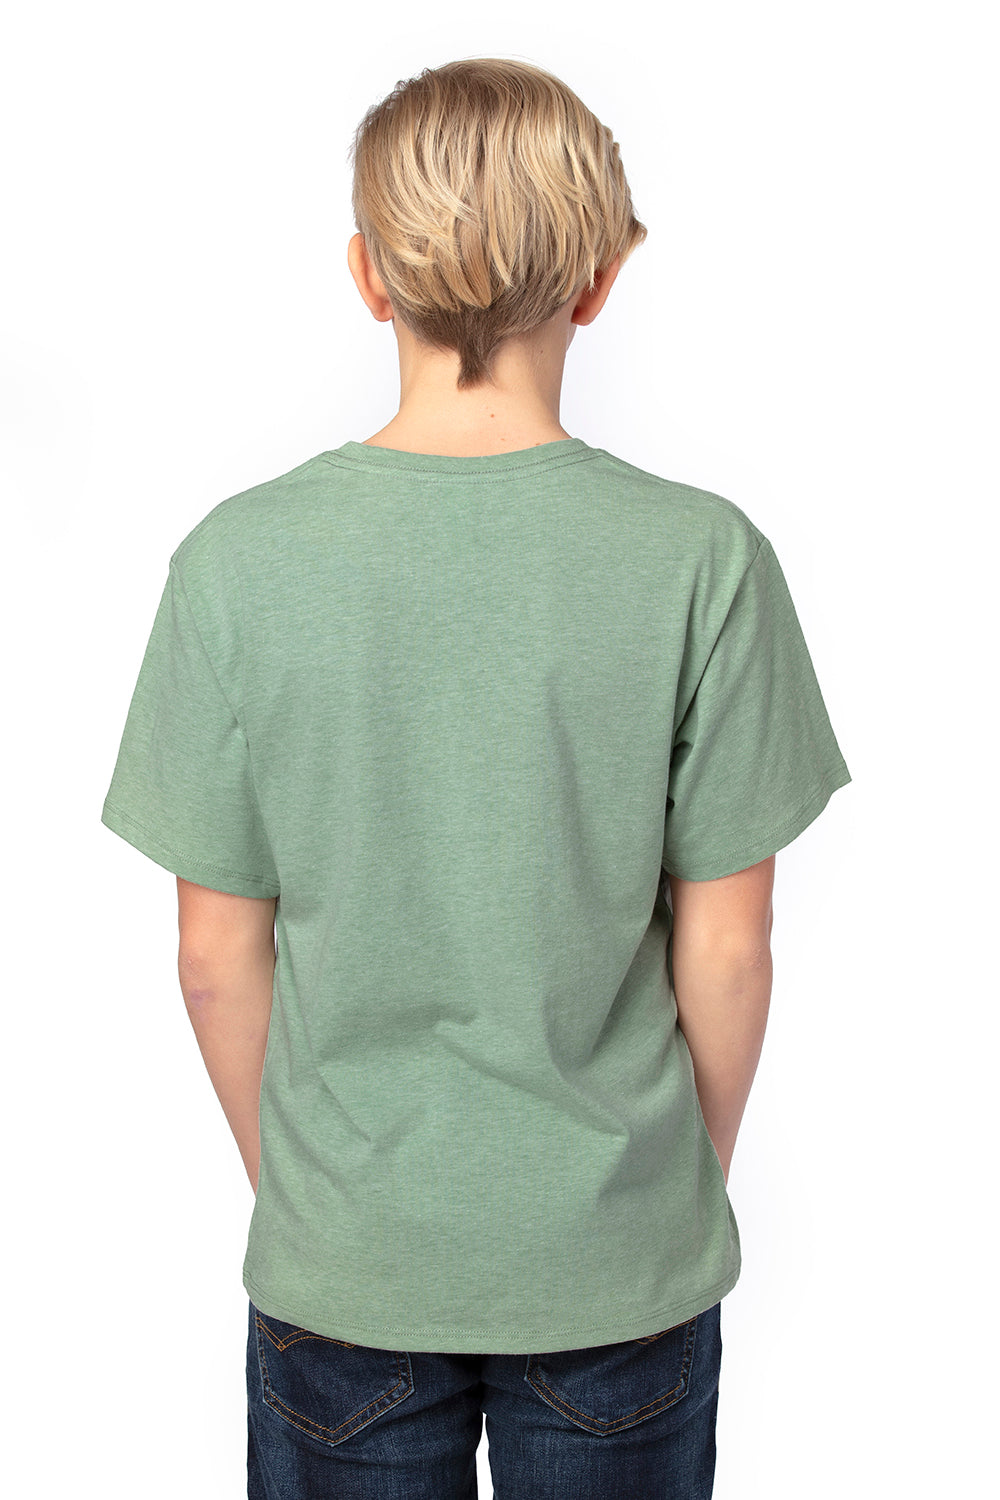 Threadfast Apparel 600A Youth Ultimate Short Sleeve Crewneck T-Shirt Heather Army Green Back